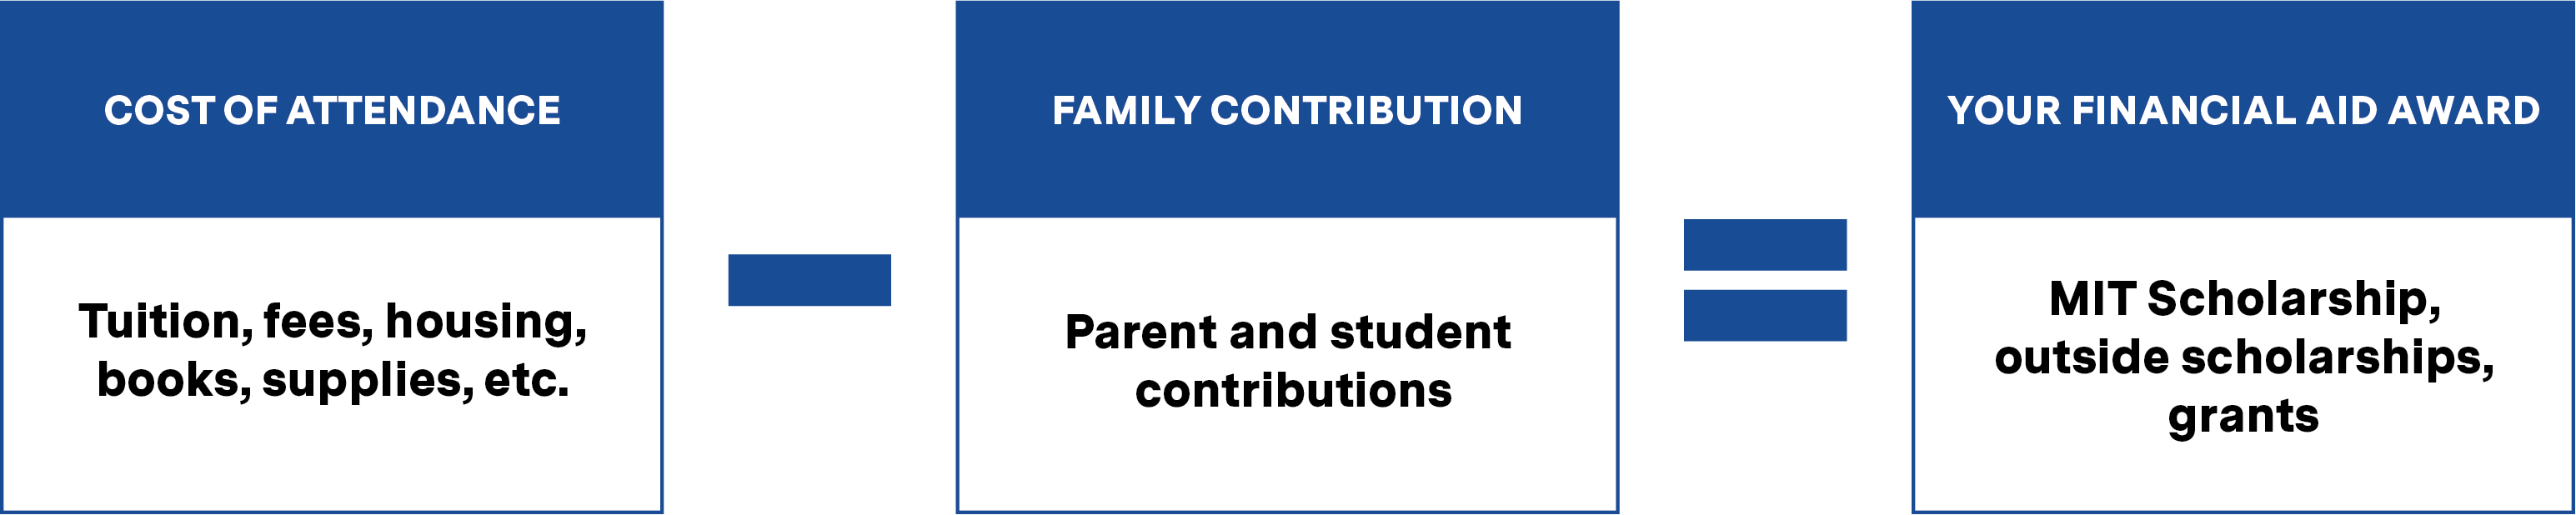 Cost of Attendance minus Family Contribution equals Your Financial Aid Award